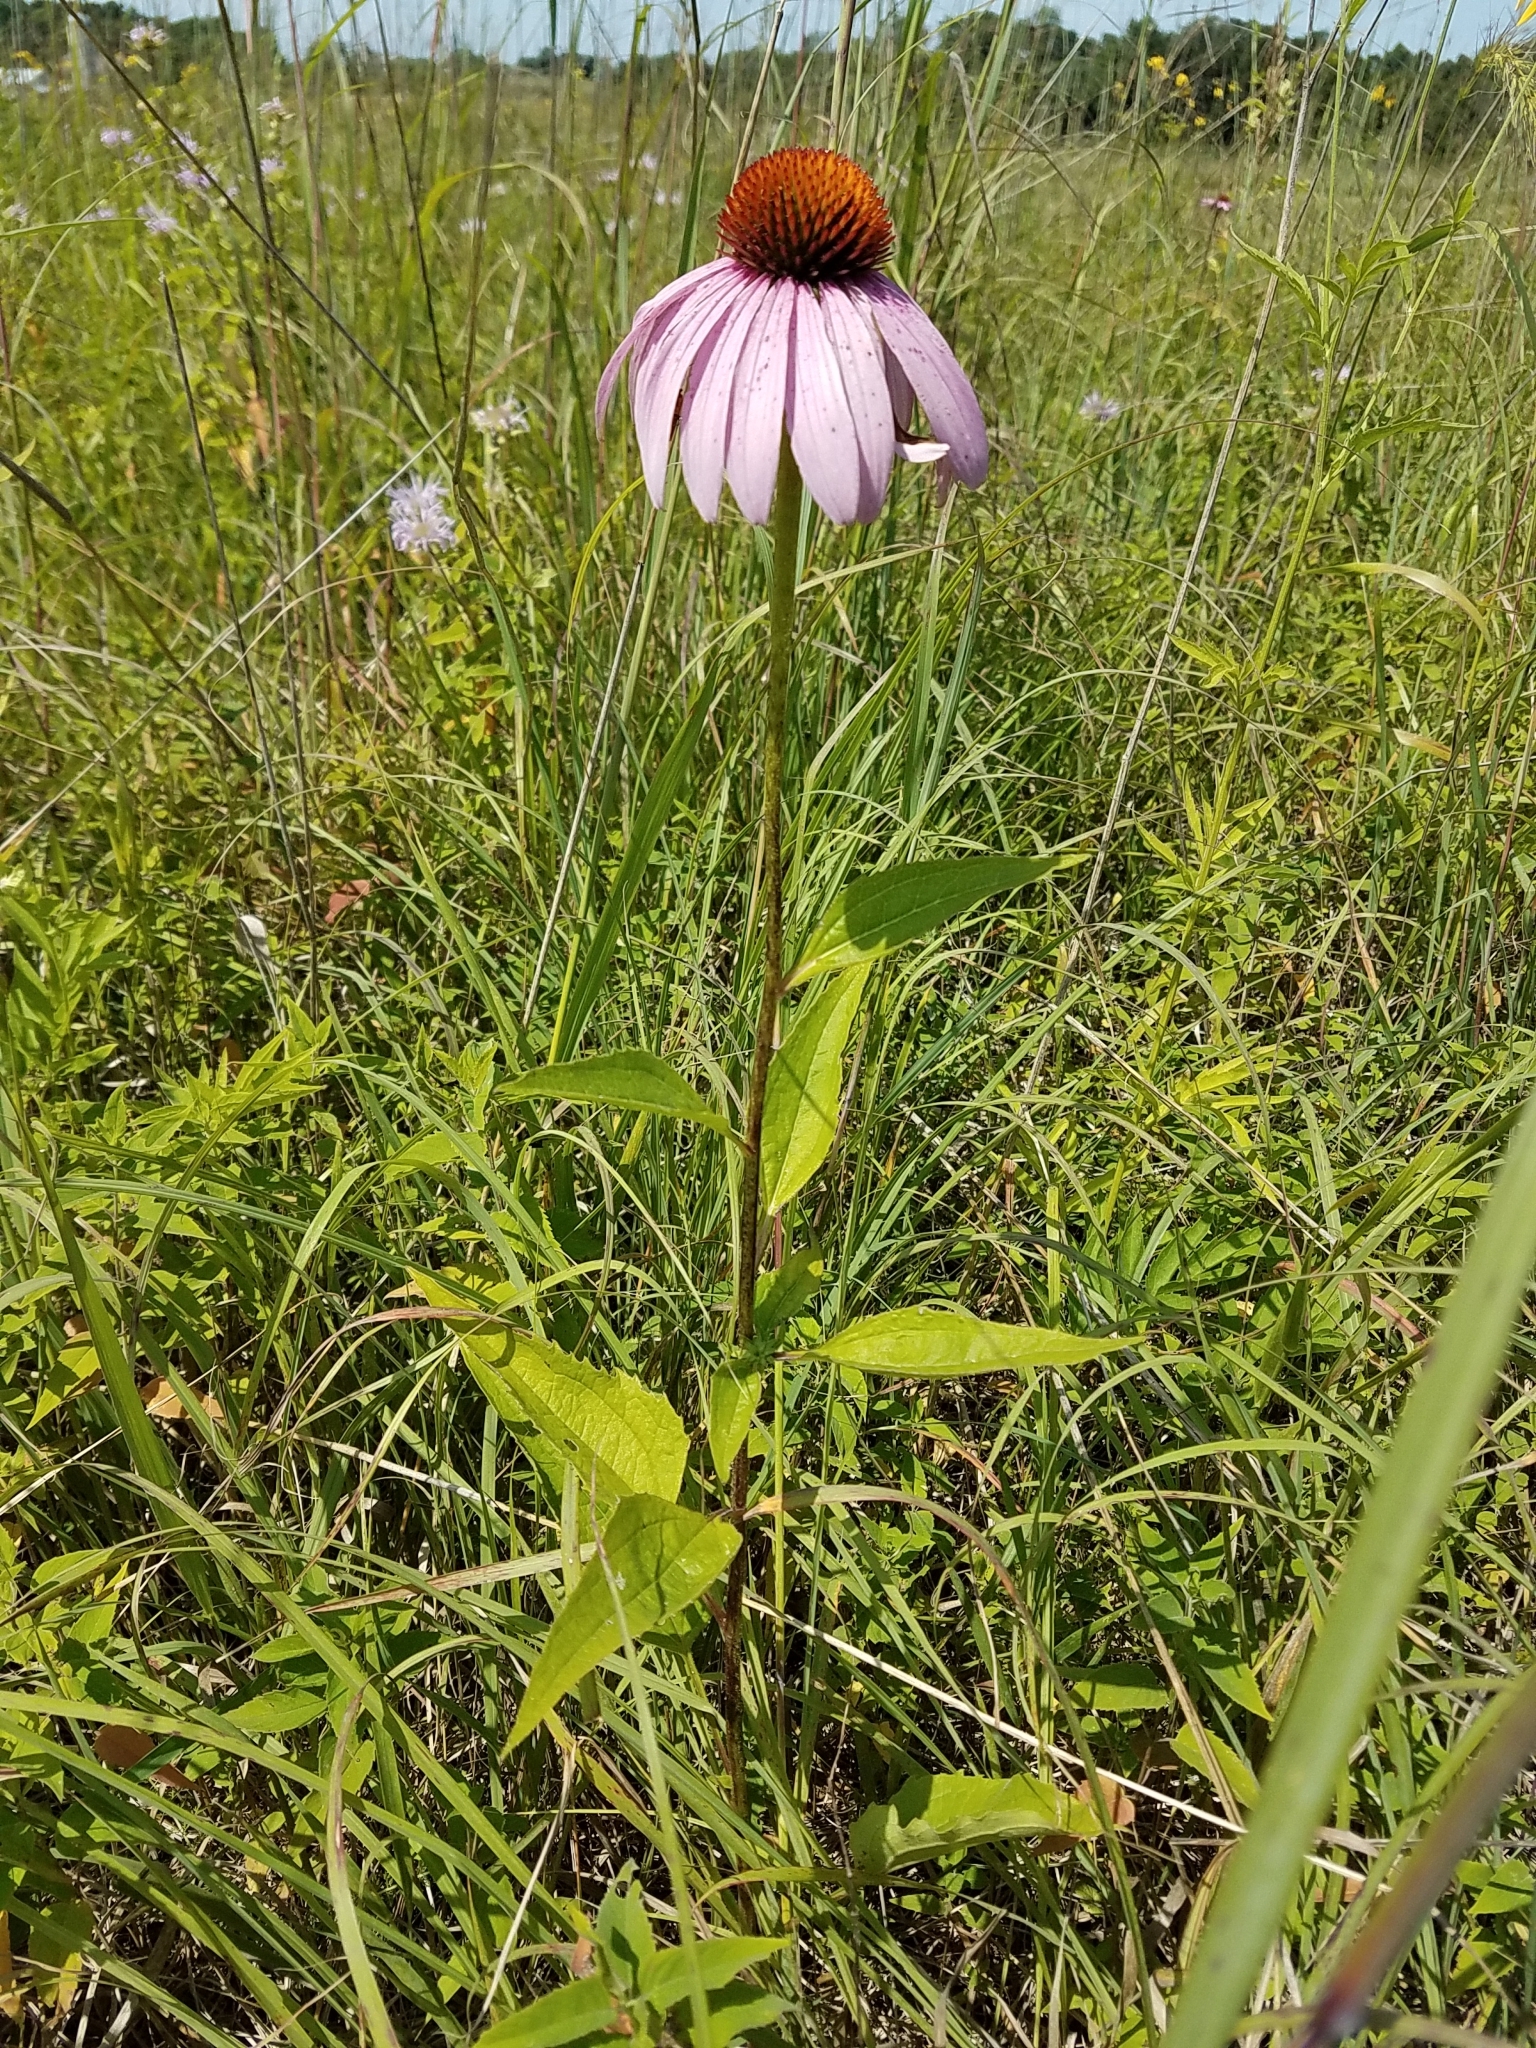 Purple coneflower in a grassland setting. The flower has a large, orange center that points directly to the sky. Several long petals drape down. The petals are oval-shaped and pinkish-purple in color.